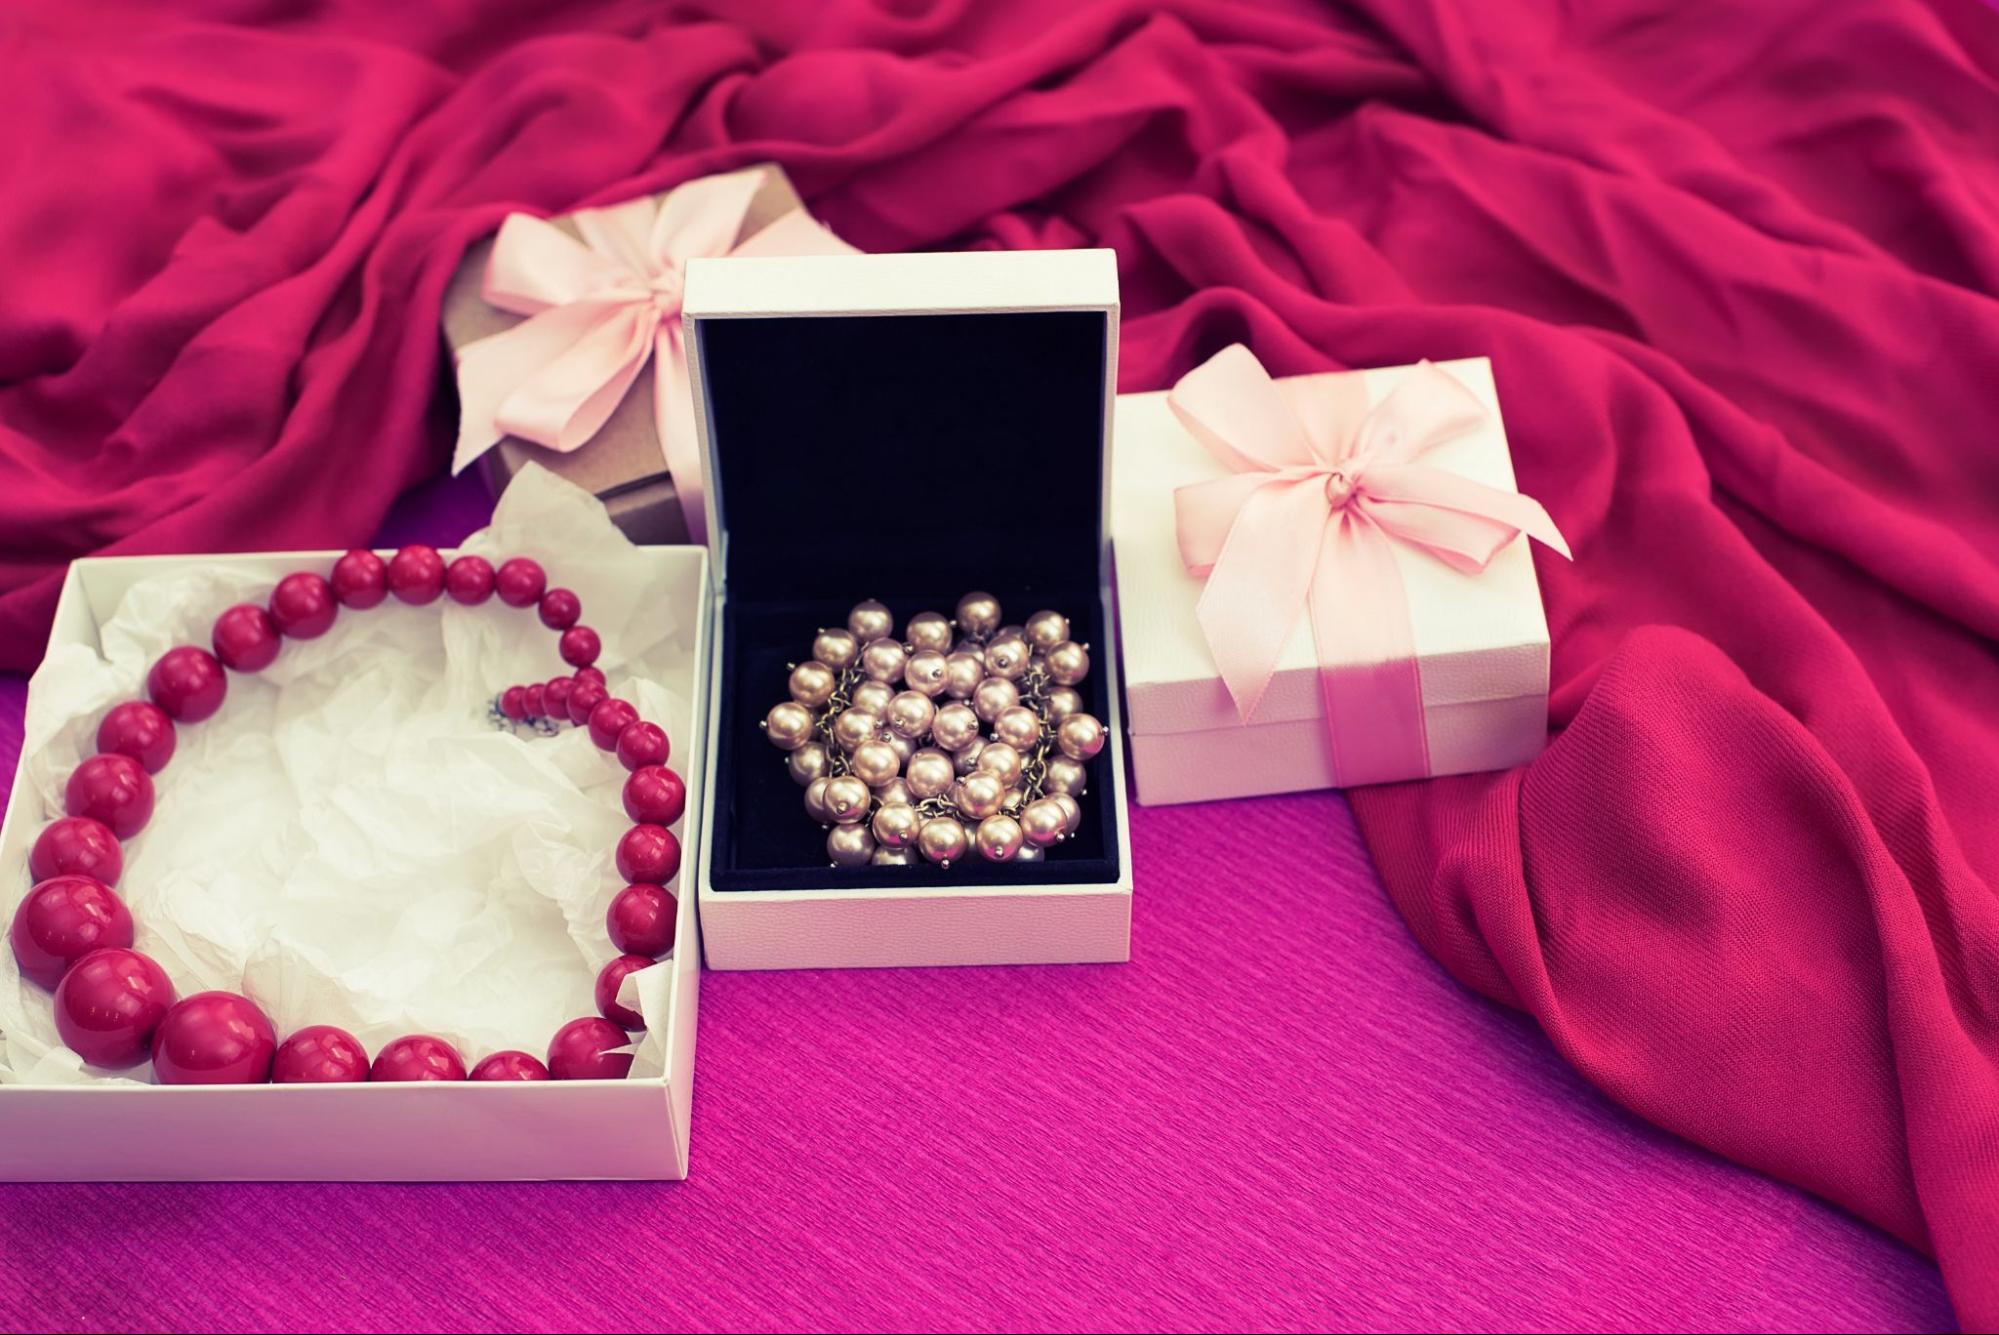 Customized Jewelry Birthday Gift: A box with a necklace and another necklace on a red cloth